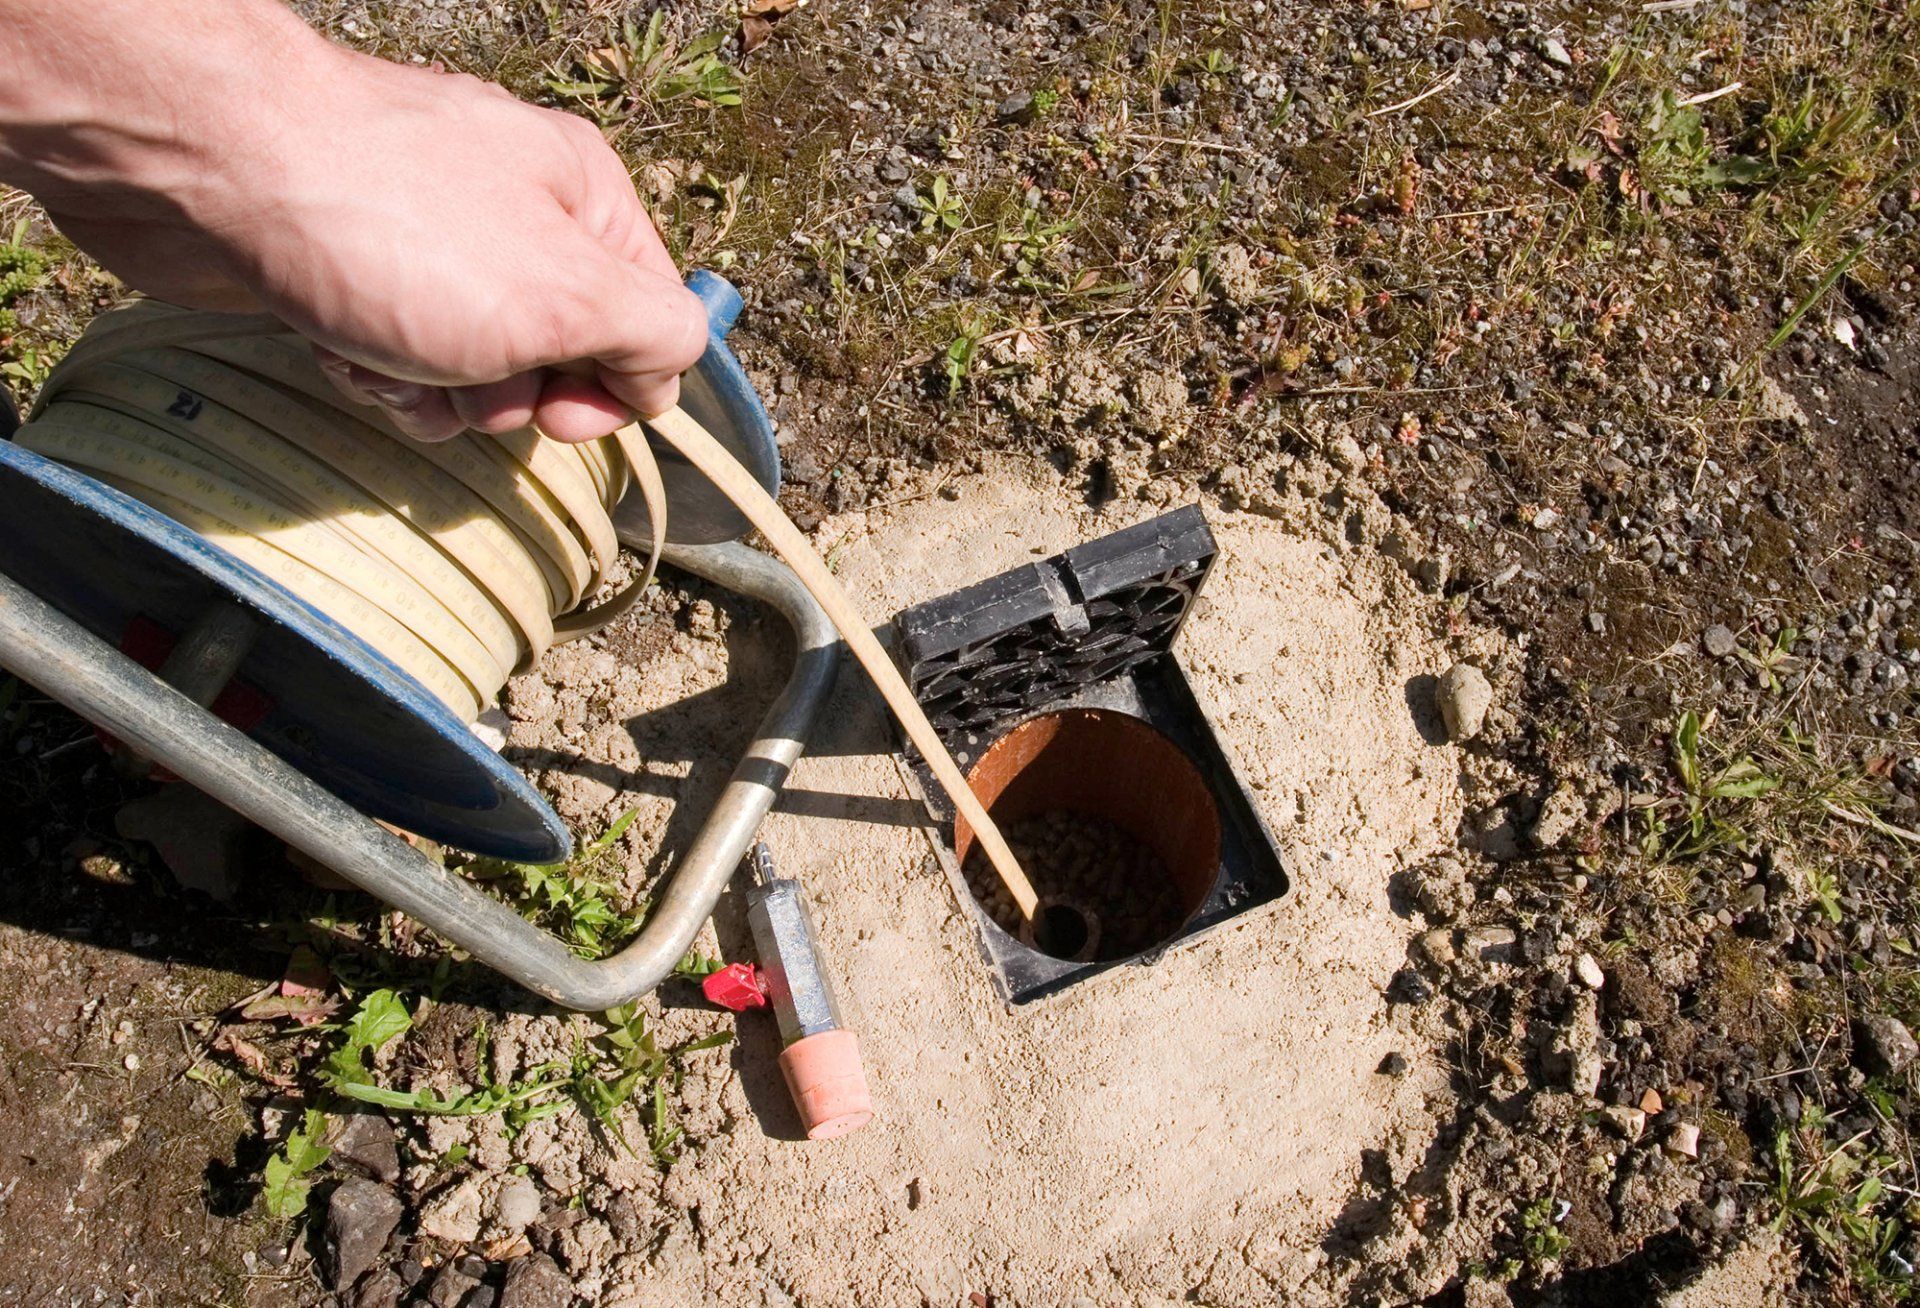 Septic tank inspection